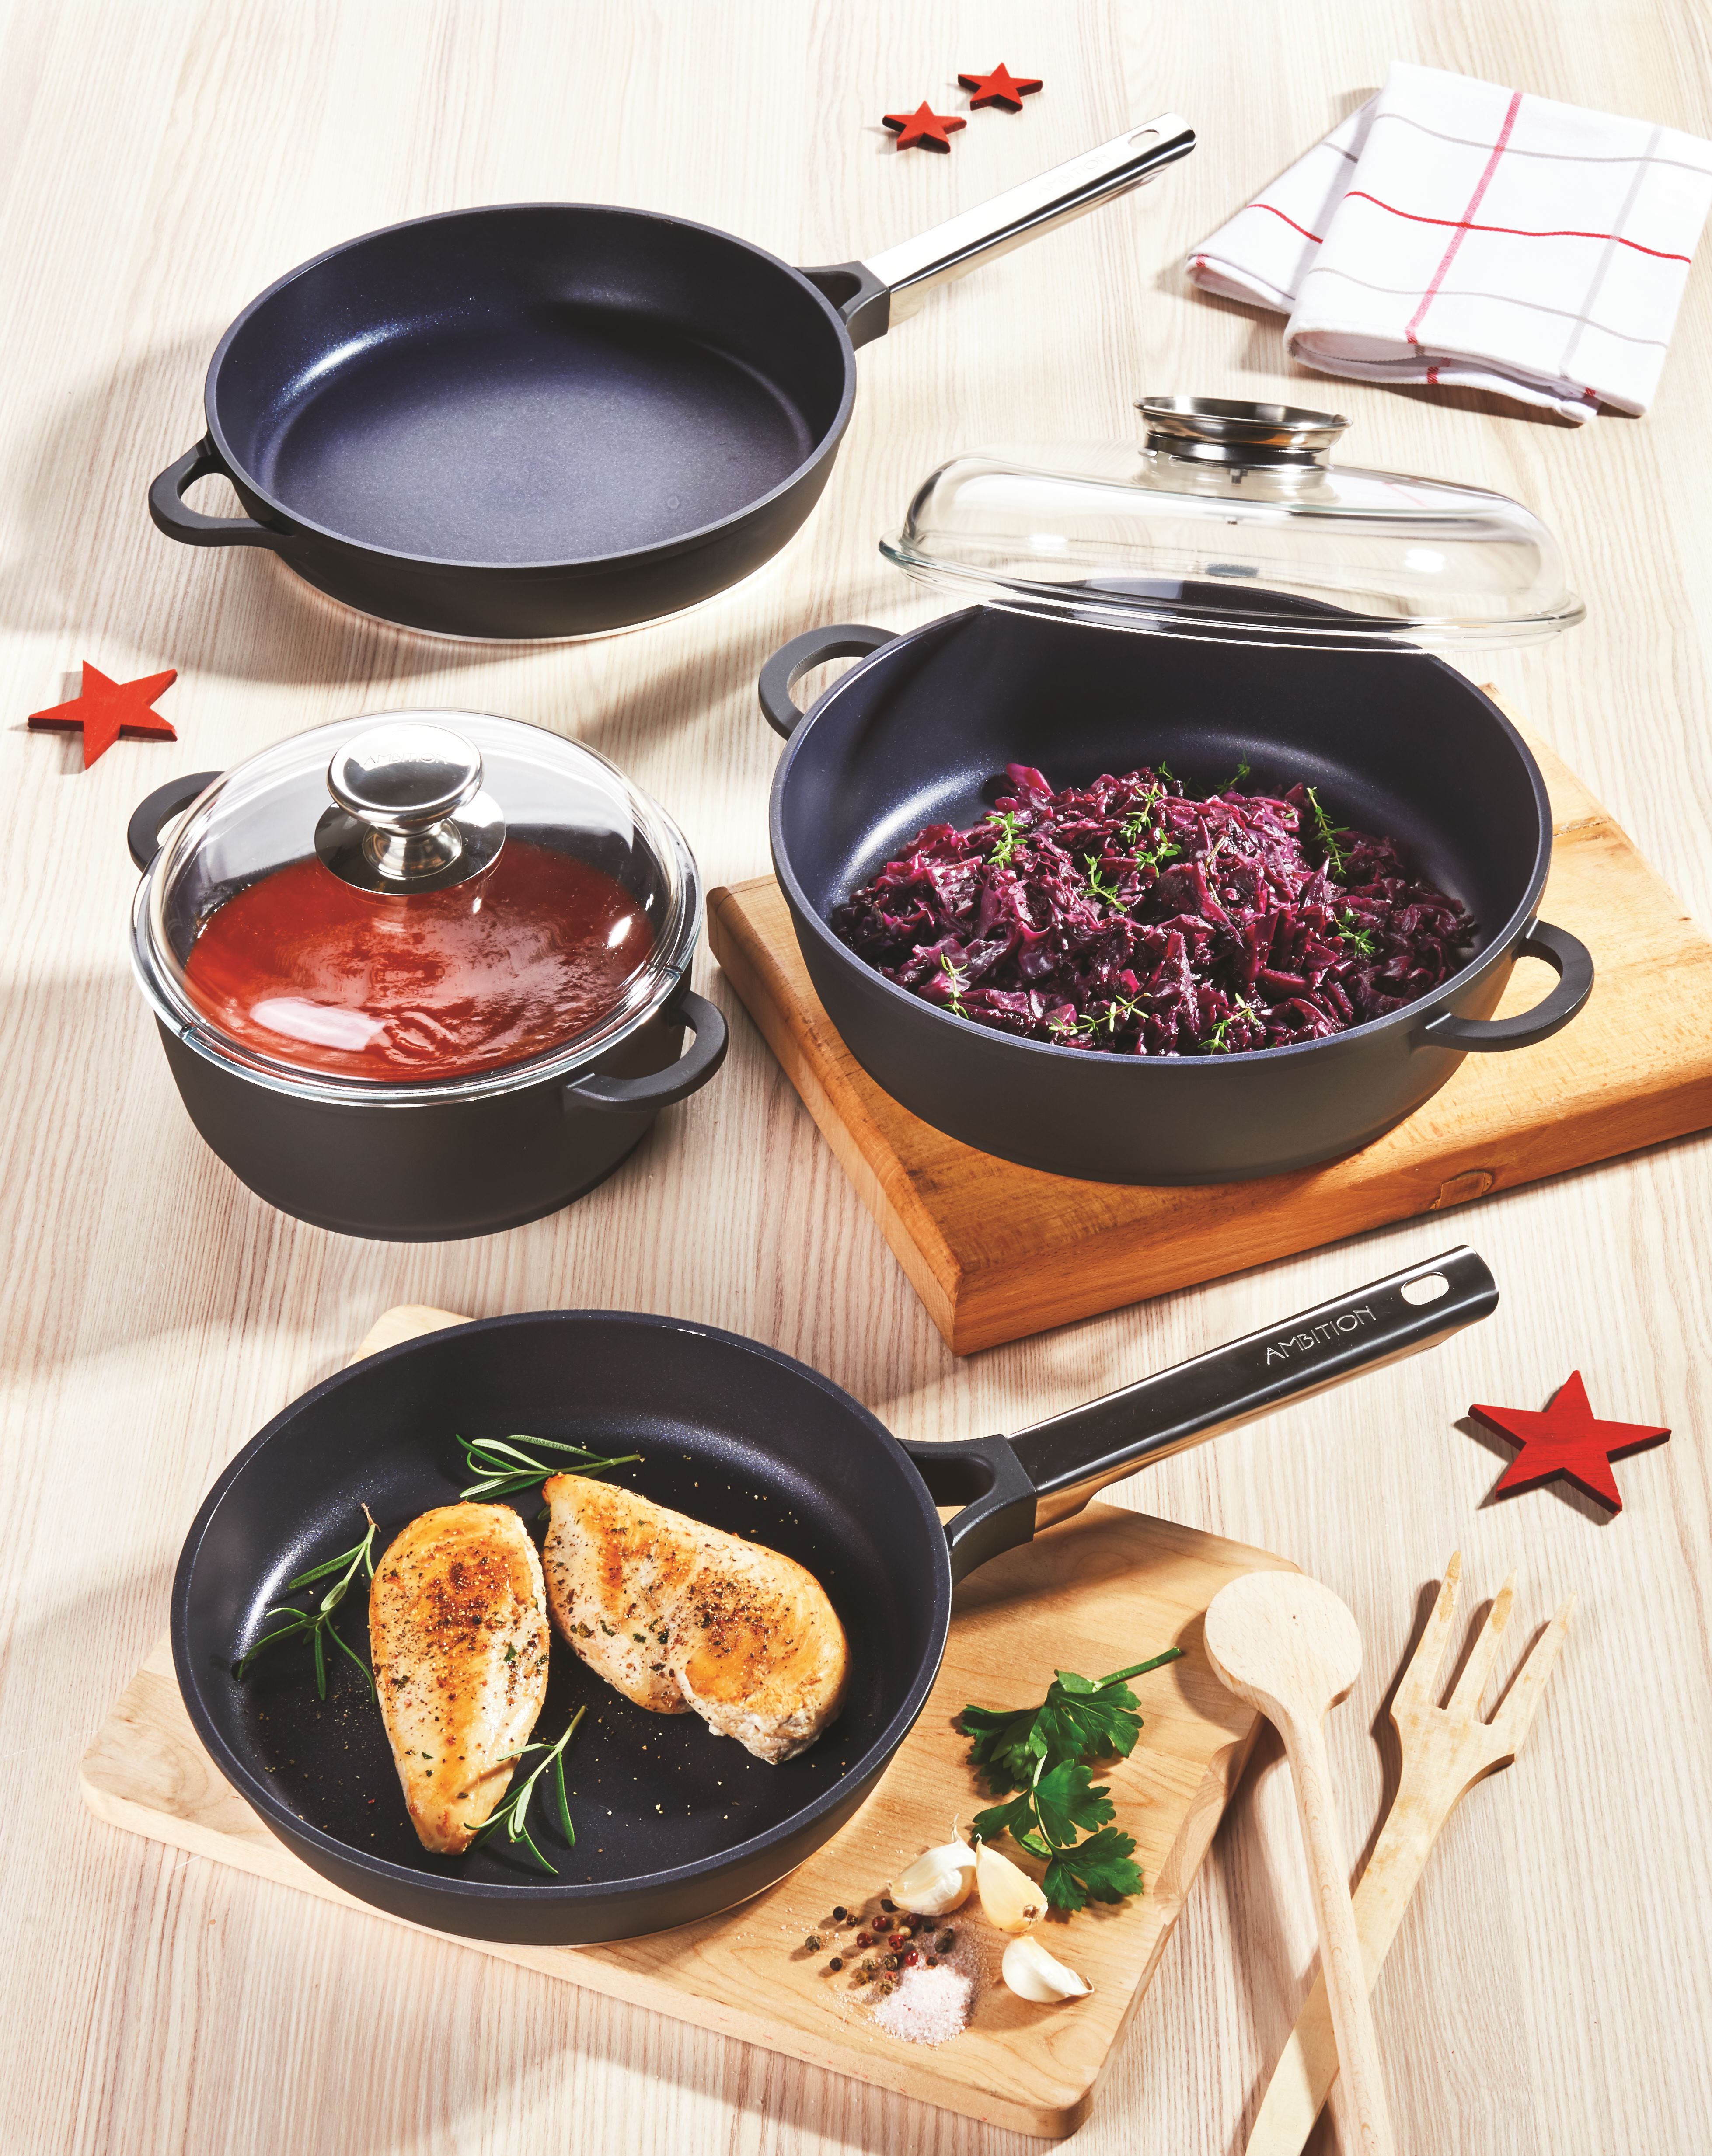 5 Christmas Gift Ideas from INTERSPAR